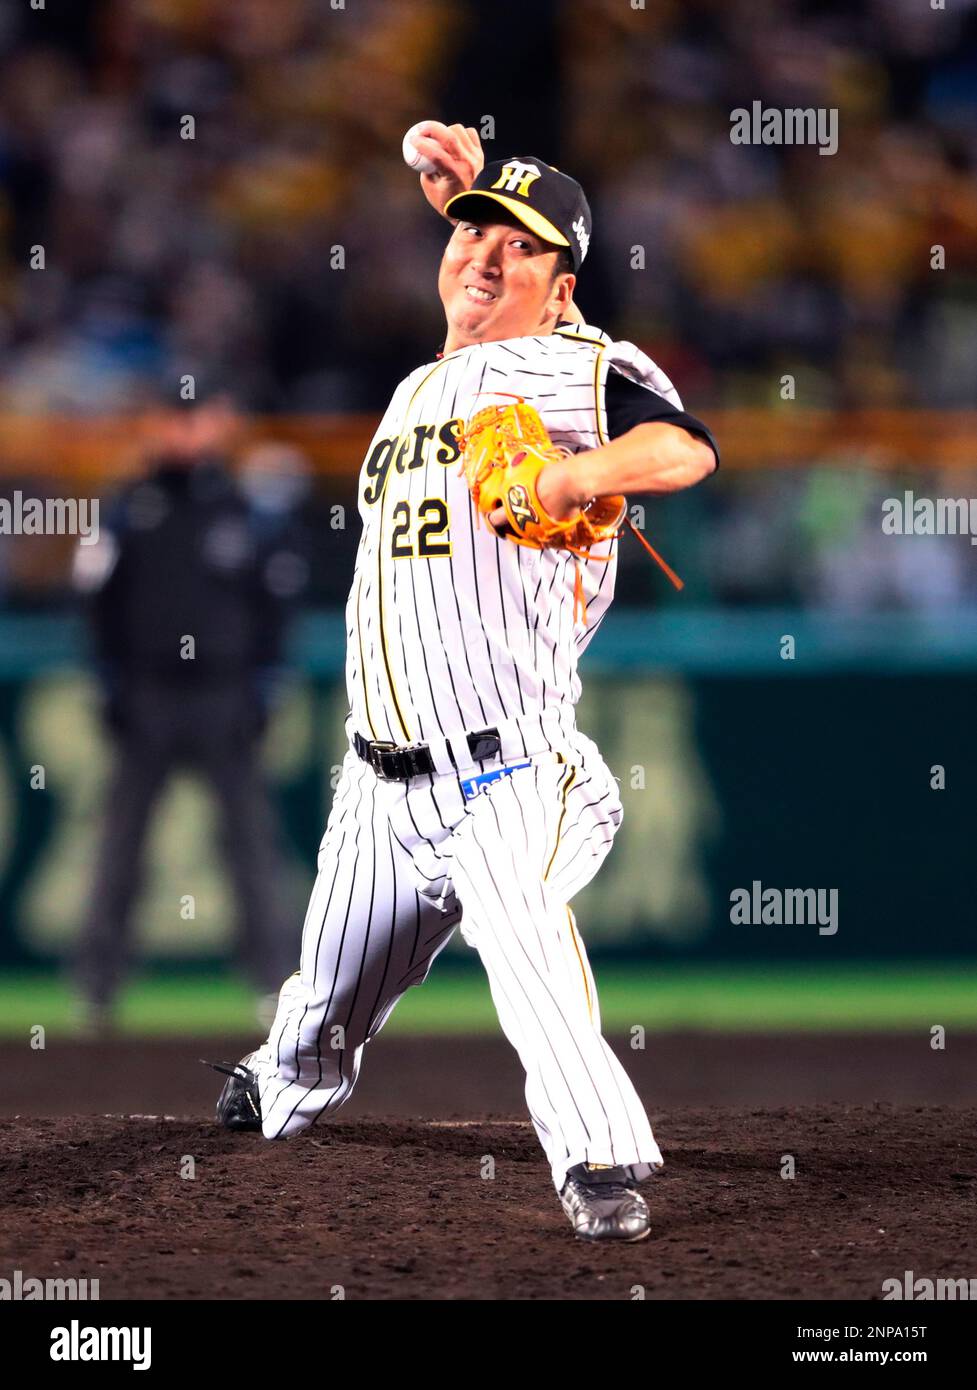 Nippon Professional Baseball (NPB) Hanshin Tigers pitcher Kyuji Fujikawa who will retire from active play until this season, pitchs in the ninth inning of the official match against Yomiuri Ginats at Hanshin